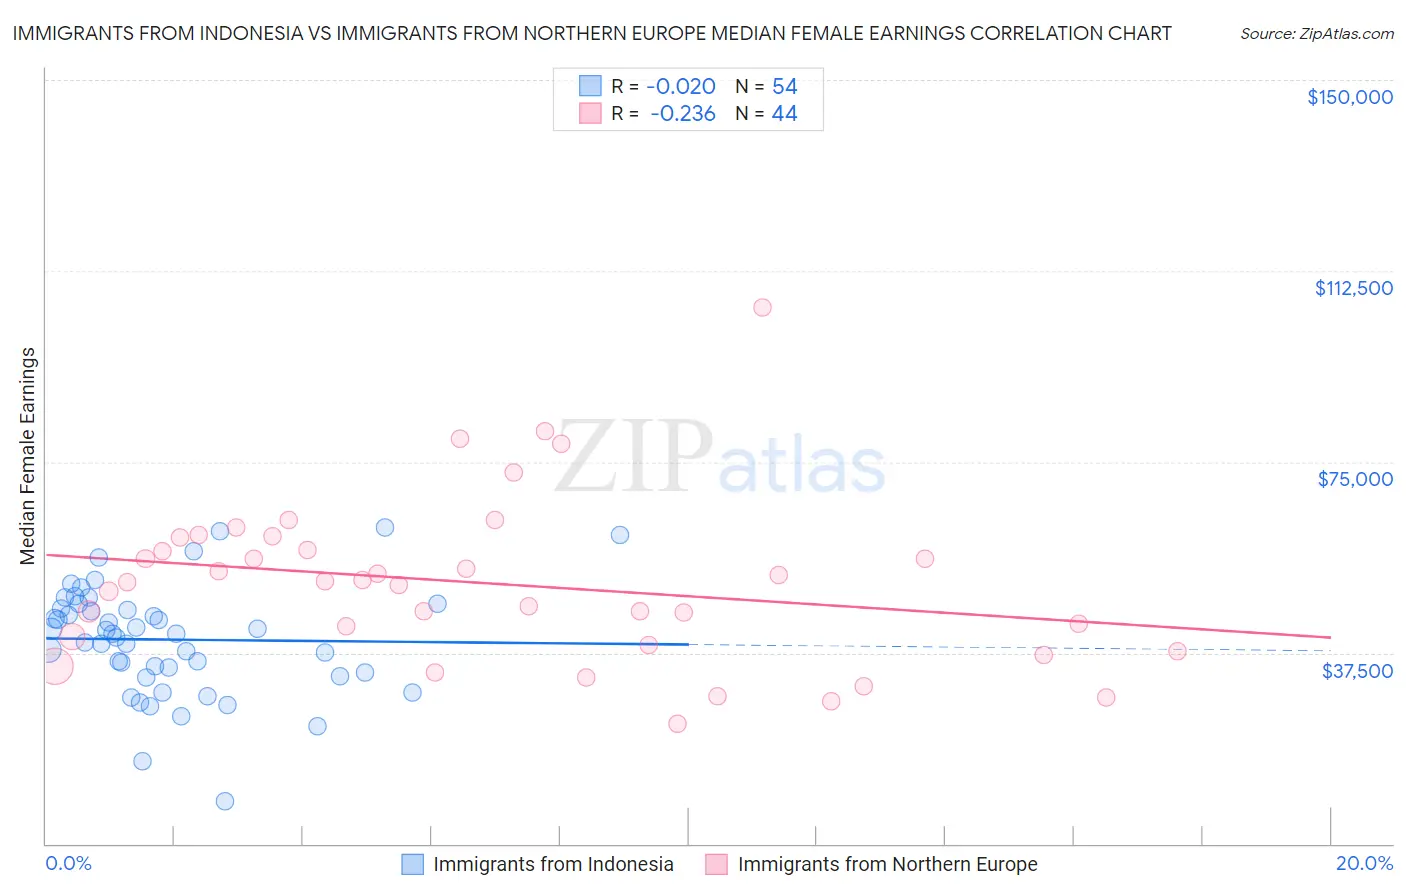 Immigrants from Indonesia vs Immigrants from Northern Europe Median Female Earnings